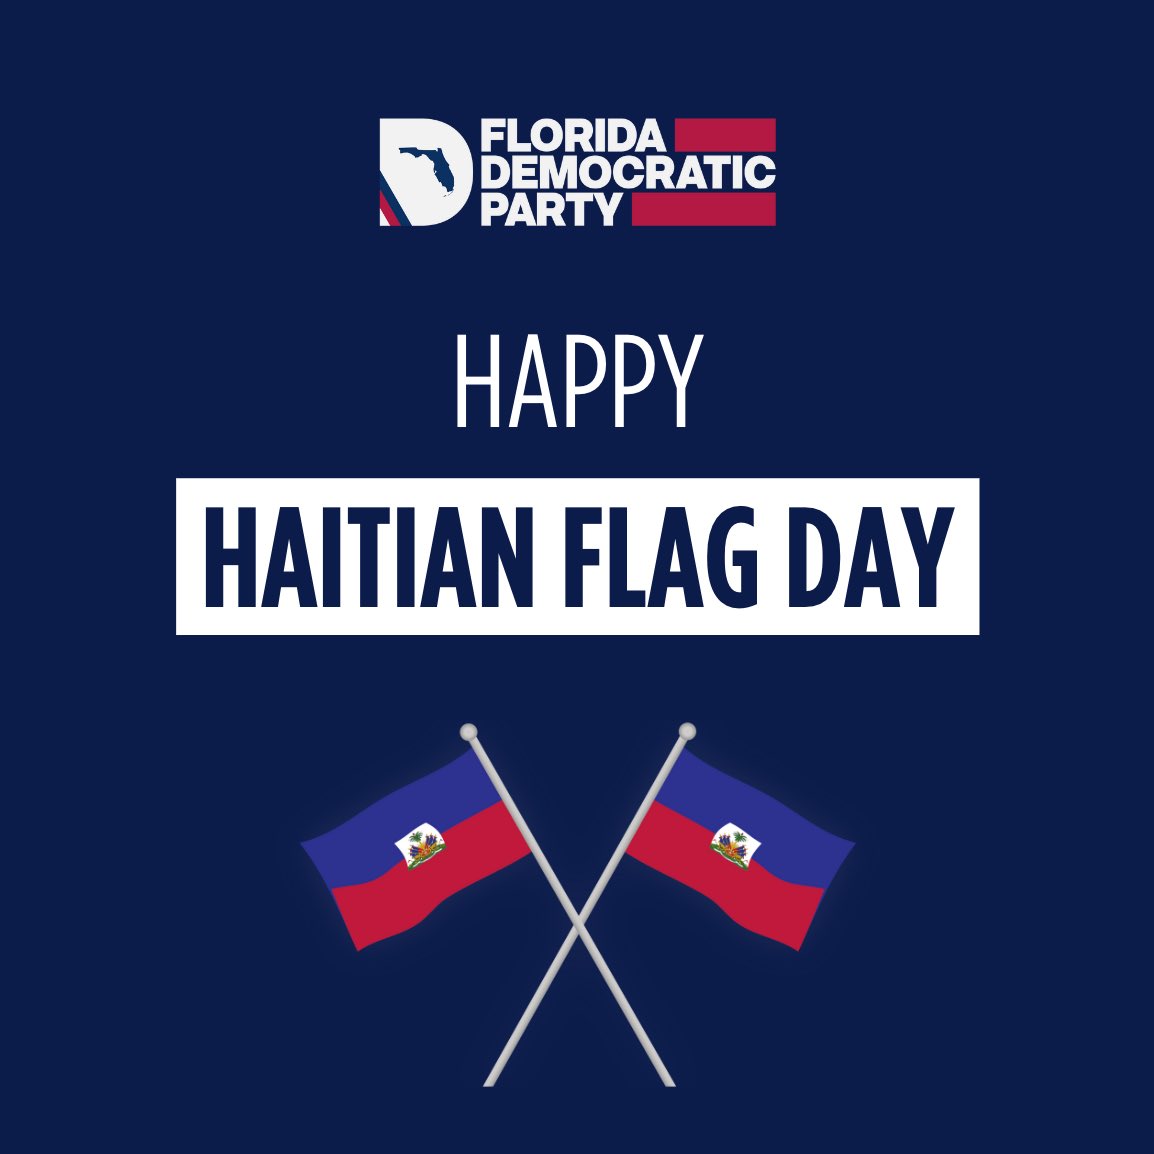 On this 221st Haitian Flag Day, we celebrate the Haitian diaspora in Florida and all of their contributions to the life and culture of our state. 

May that flag continue to inspire Haitians across the world to strive for liberty and hope in all situations.